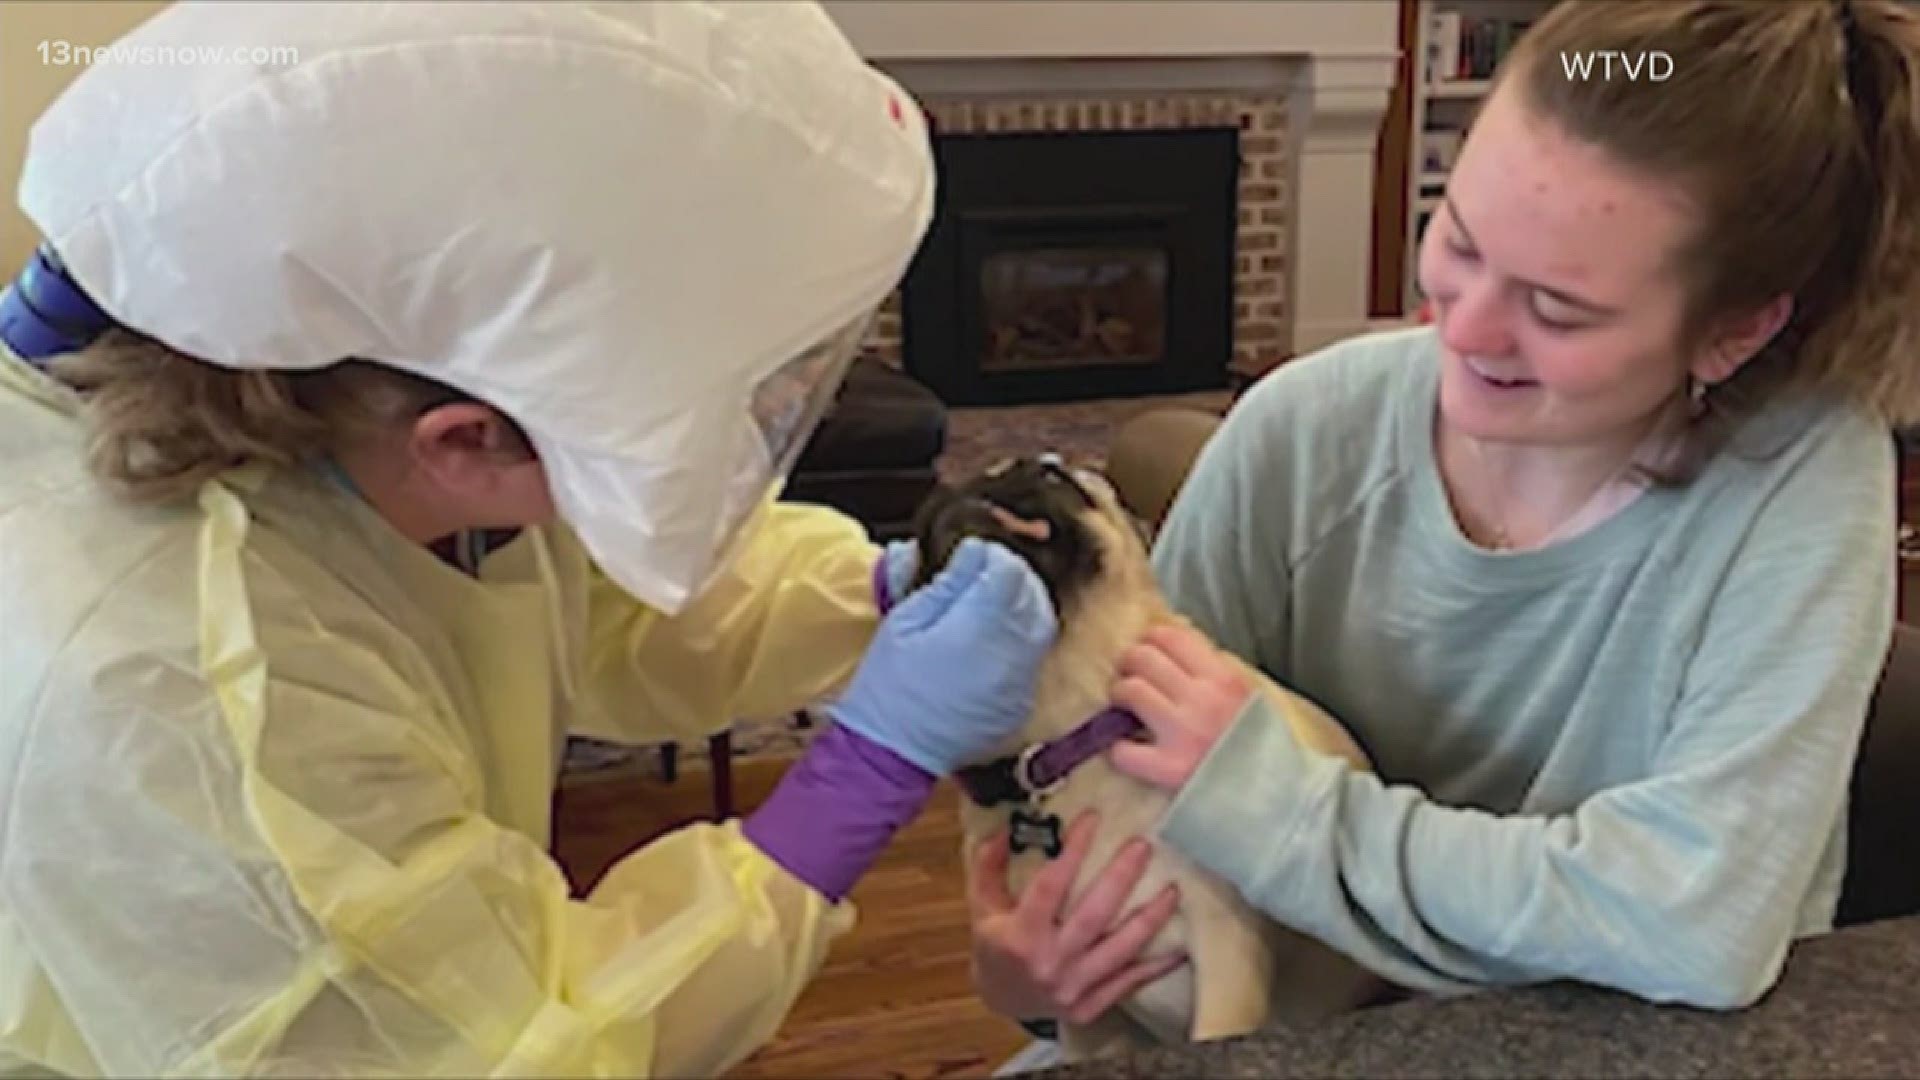 A family in North Carolina is now experiencing four cases of coronavirus under one roof: the mother, father, son... and their dog.